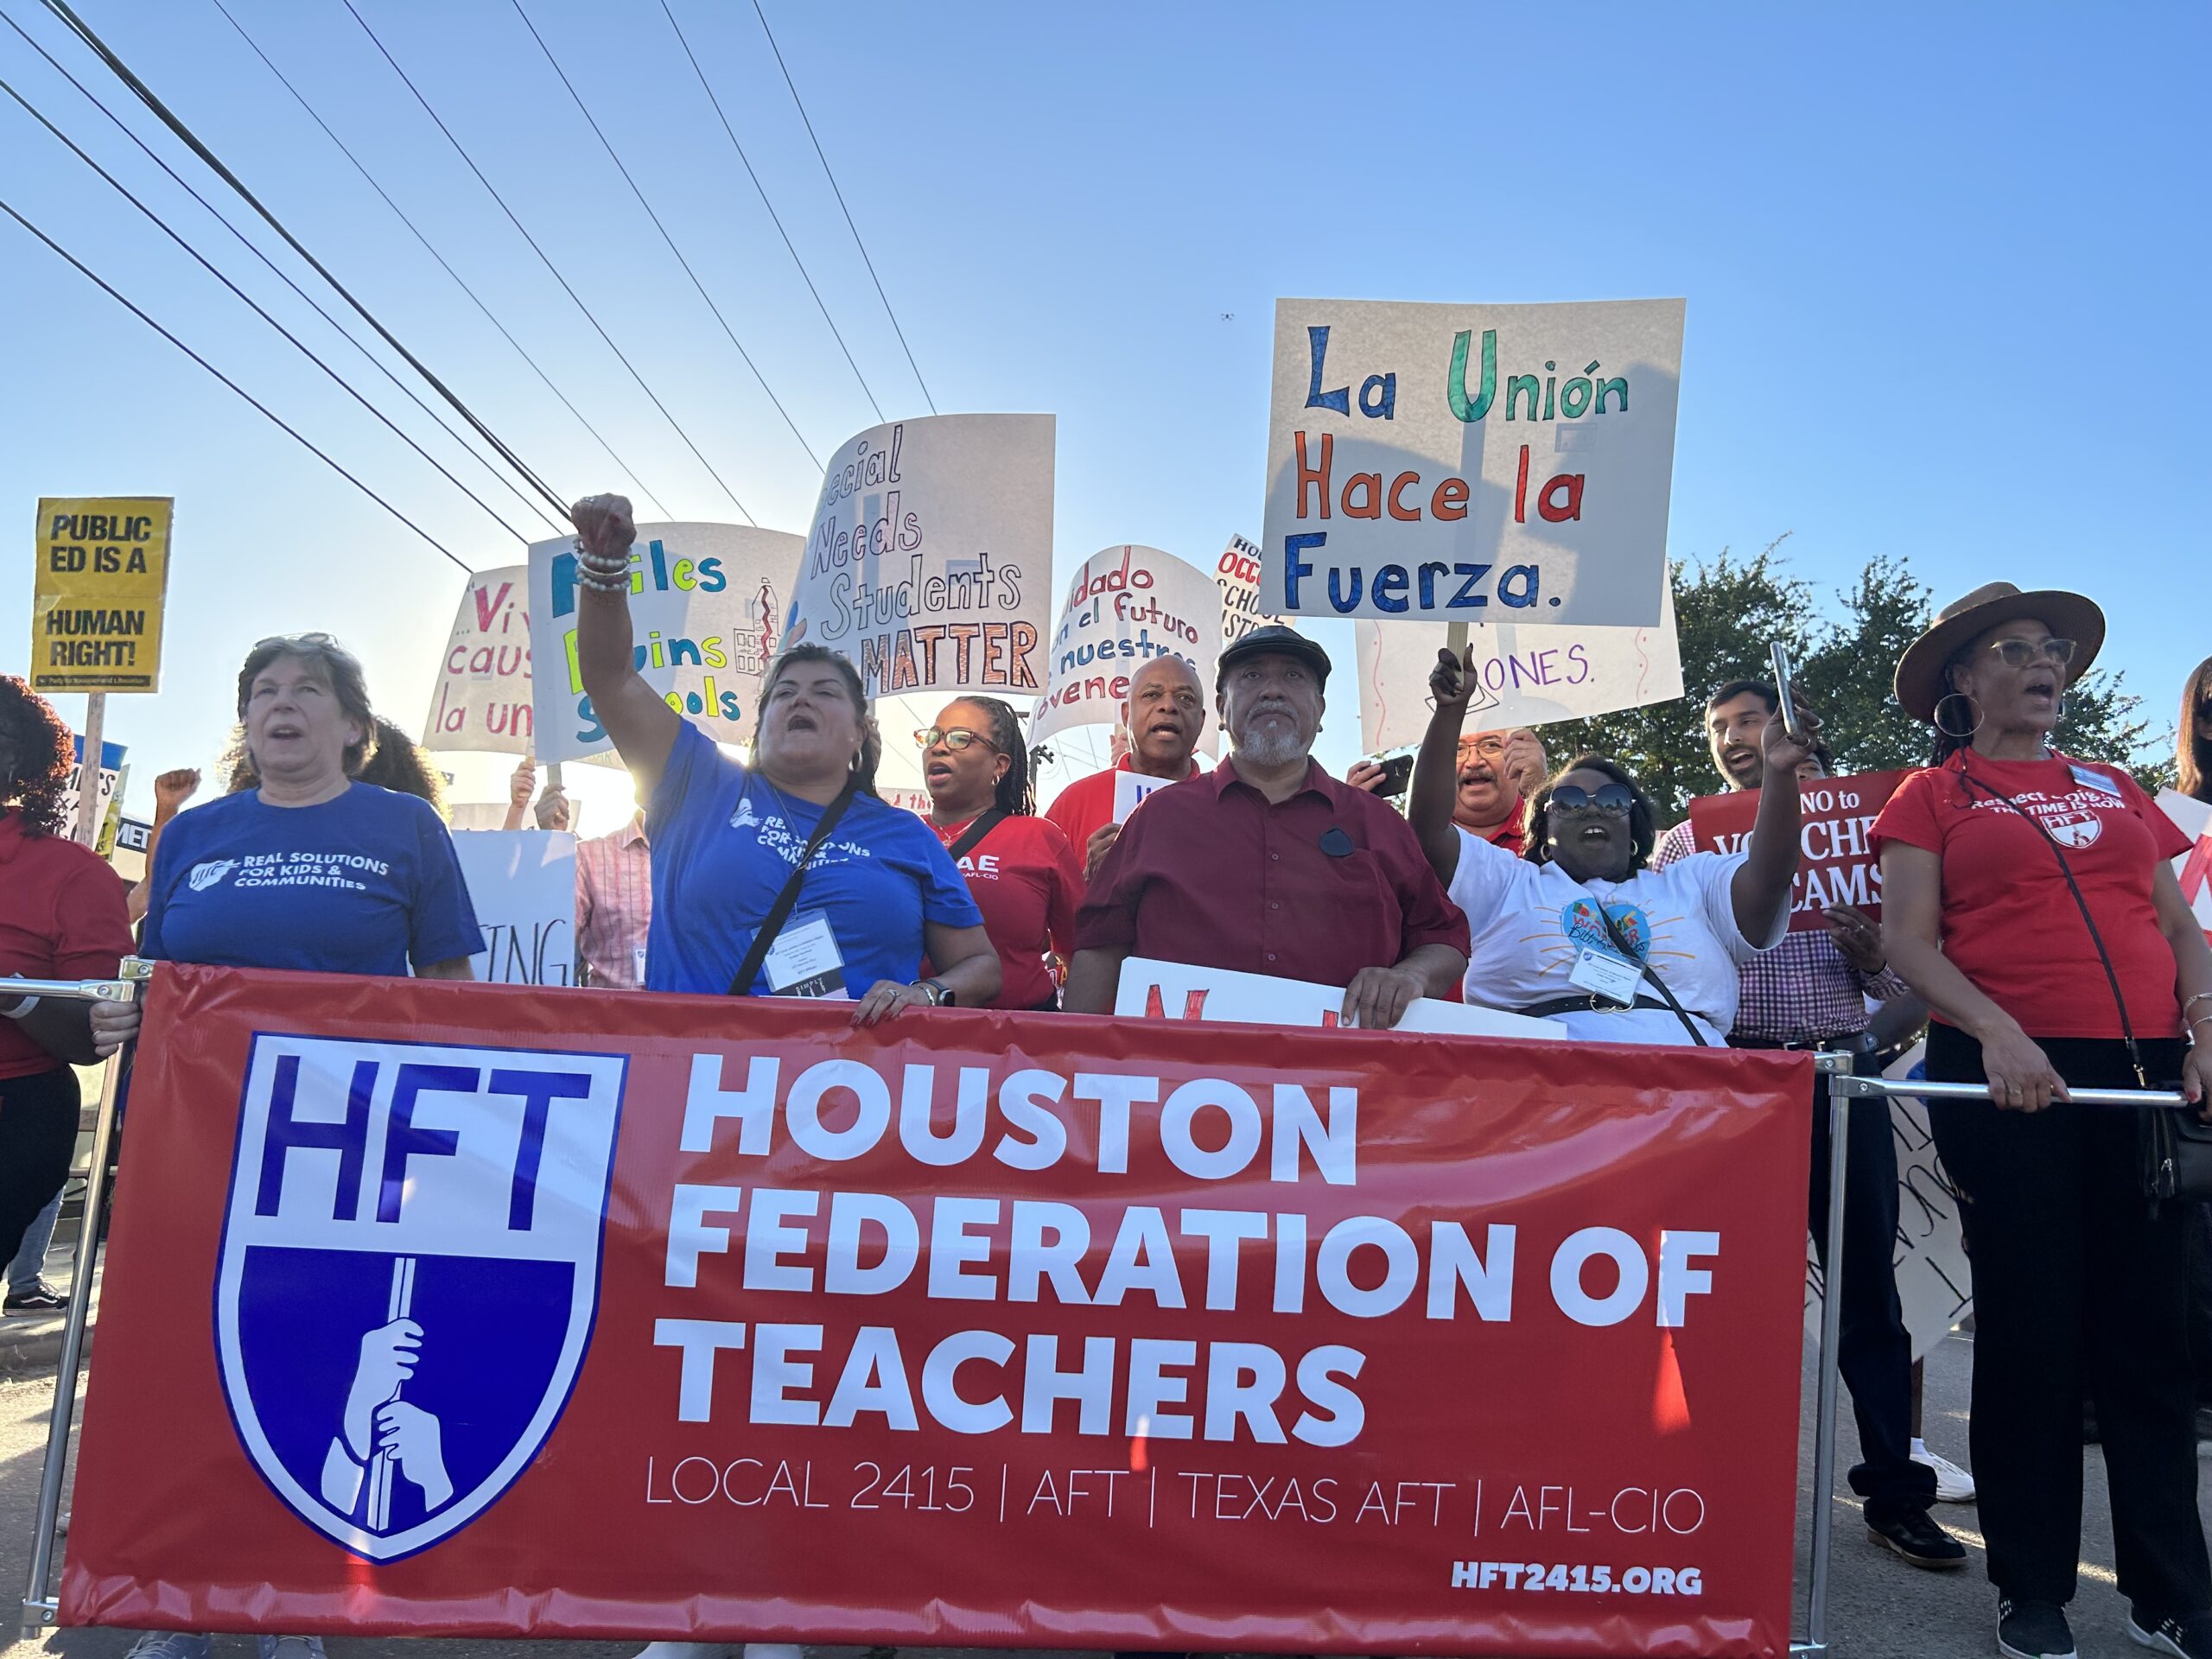 A diverse group of men and women, many in red union t-shirts, with several in front holding a large Houston Federation of Teachers banner, march in the street.